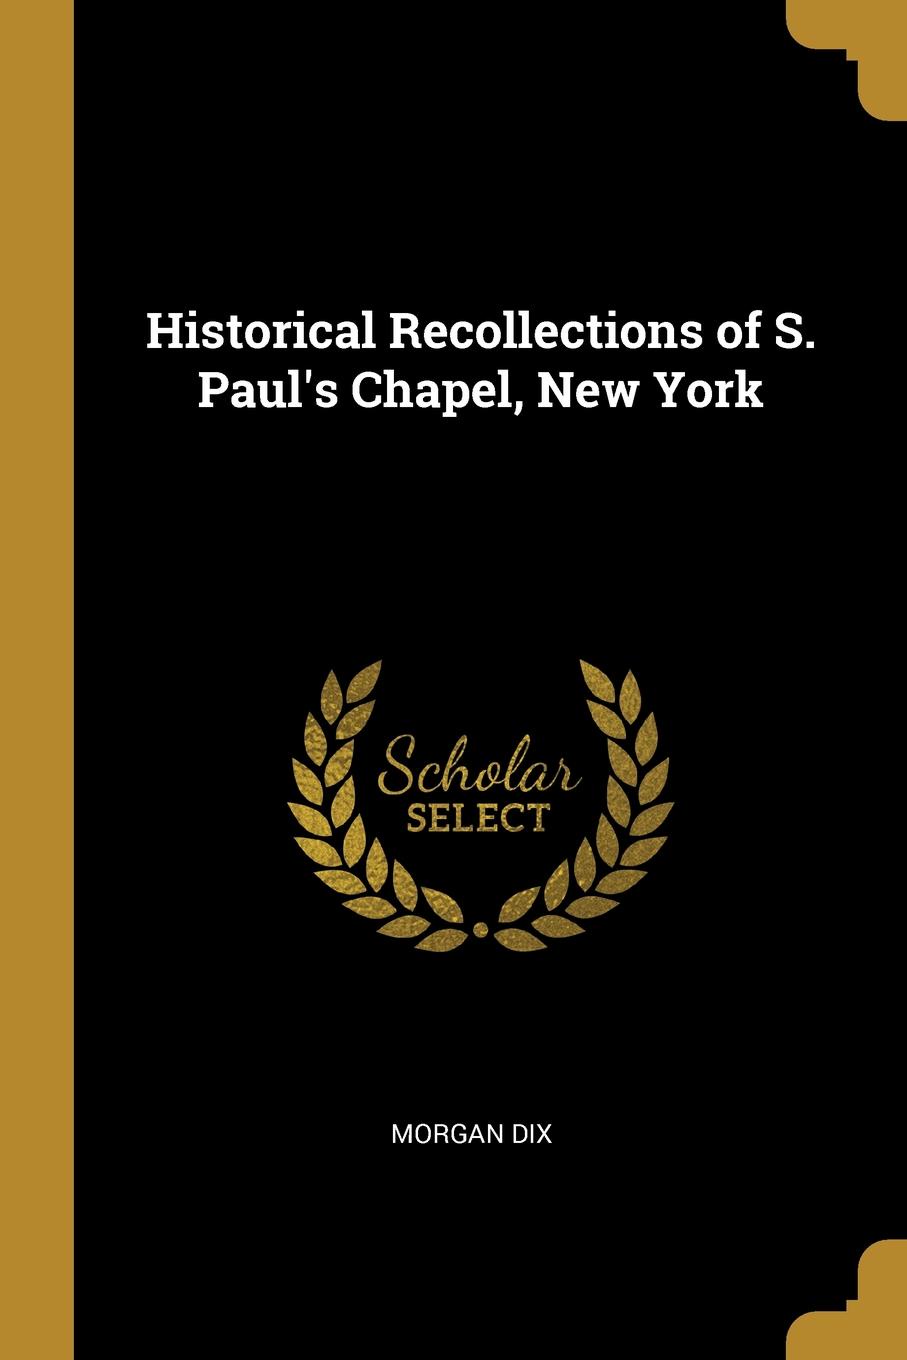 Historical Recollections of S. Paul.s Chapel, New York